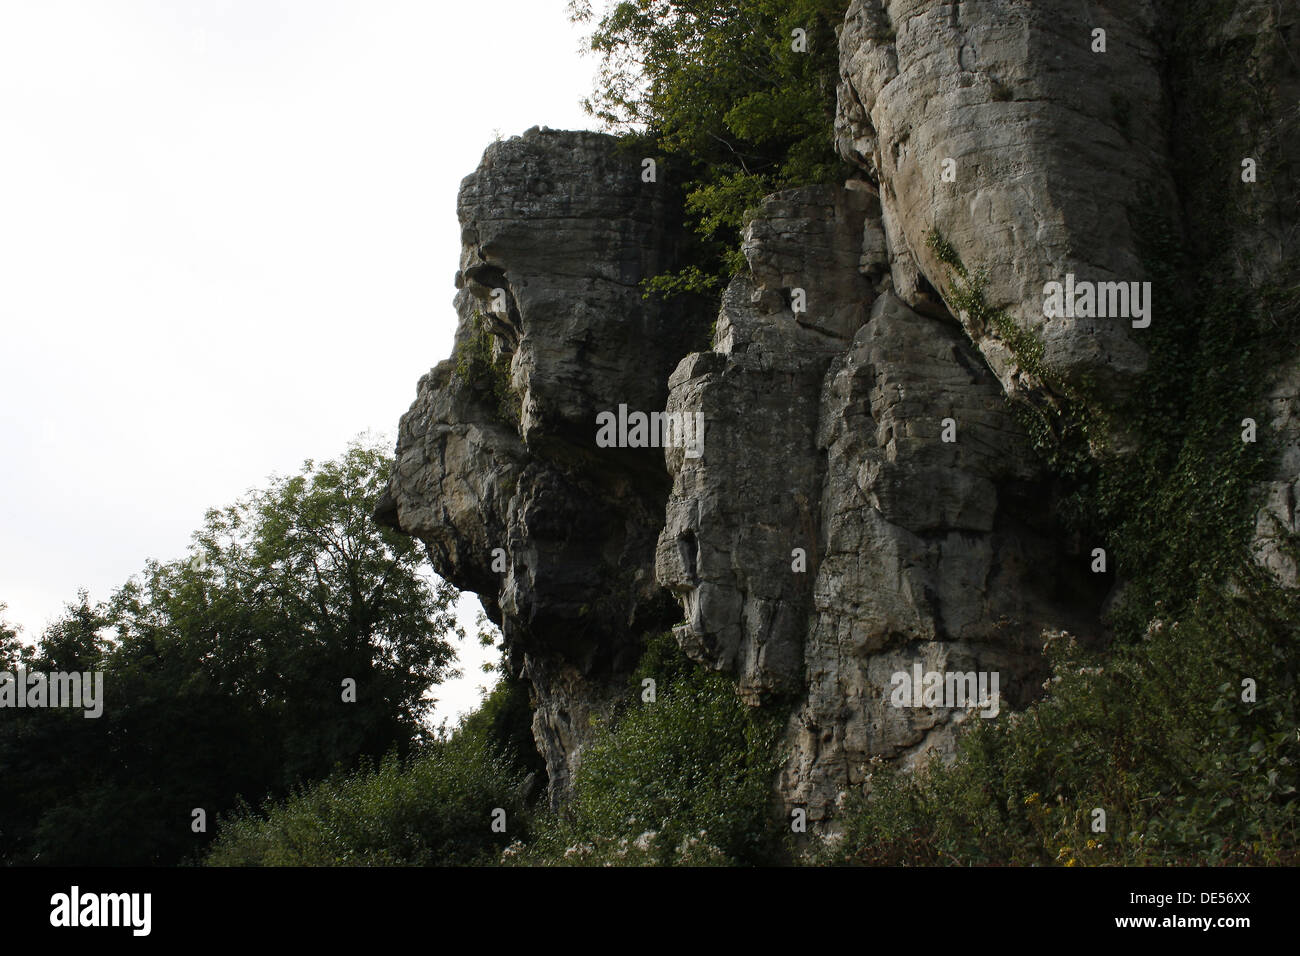 Creswell Crags, Welbeck, Worksop, Nottinghamshire, Regno Unito Foto Stock